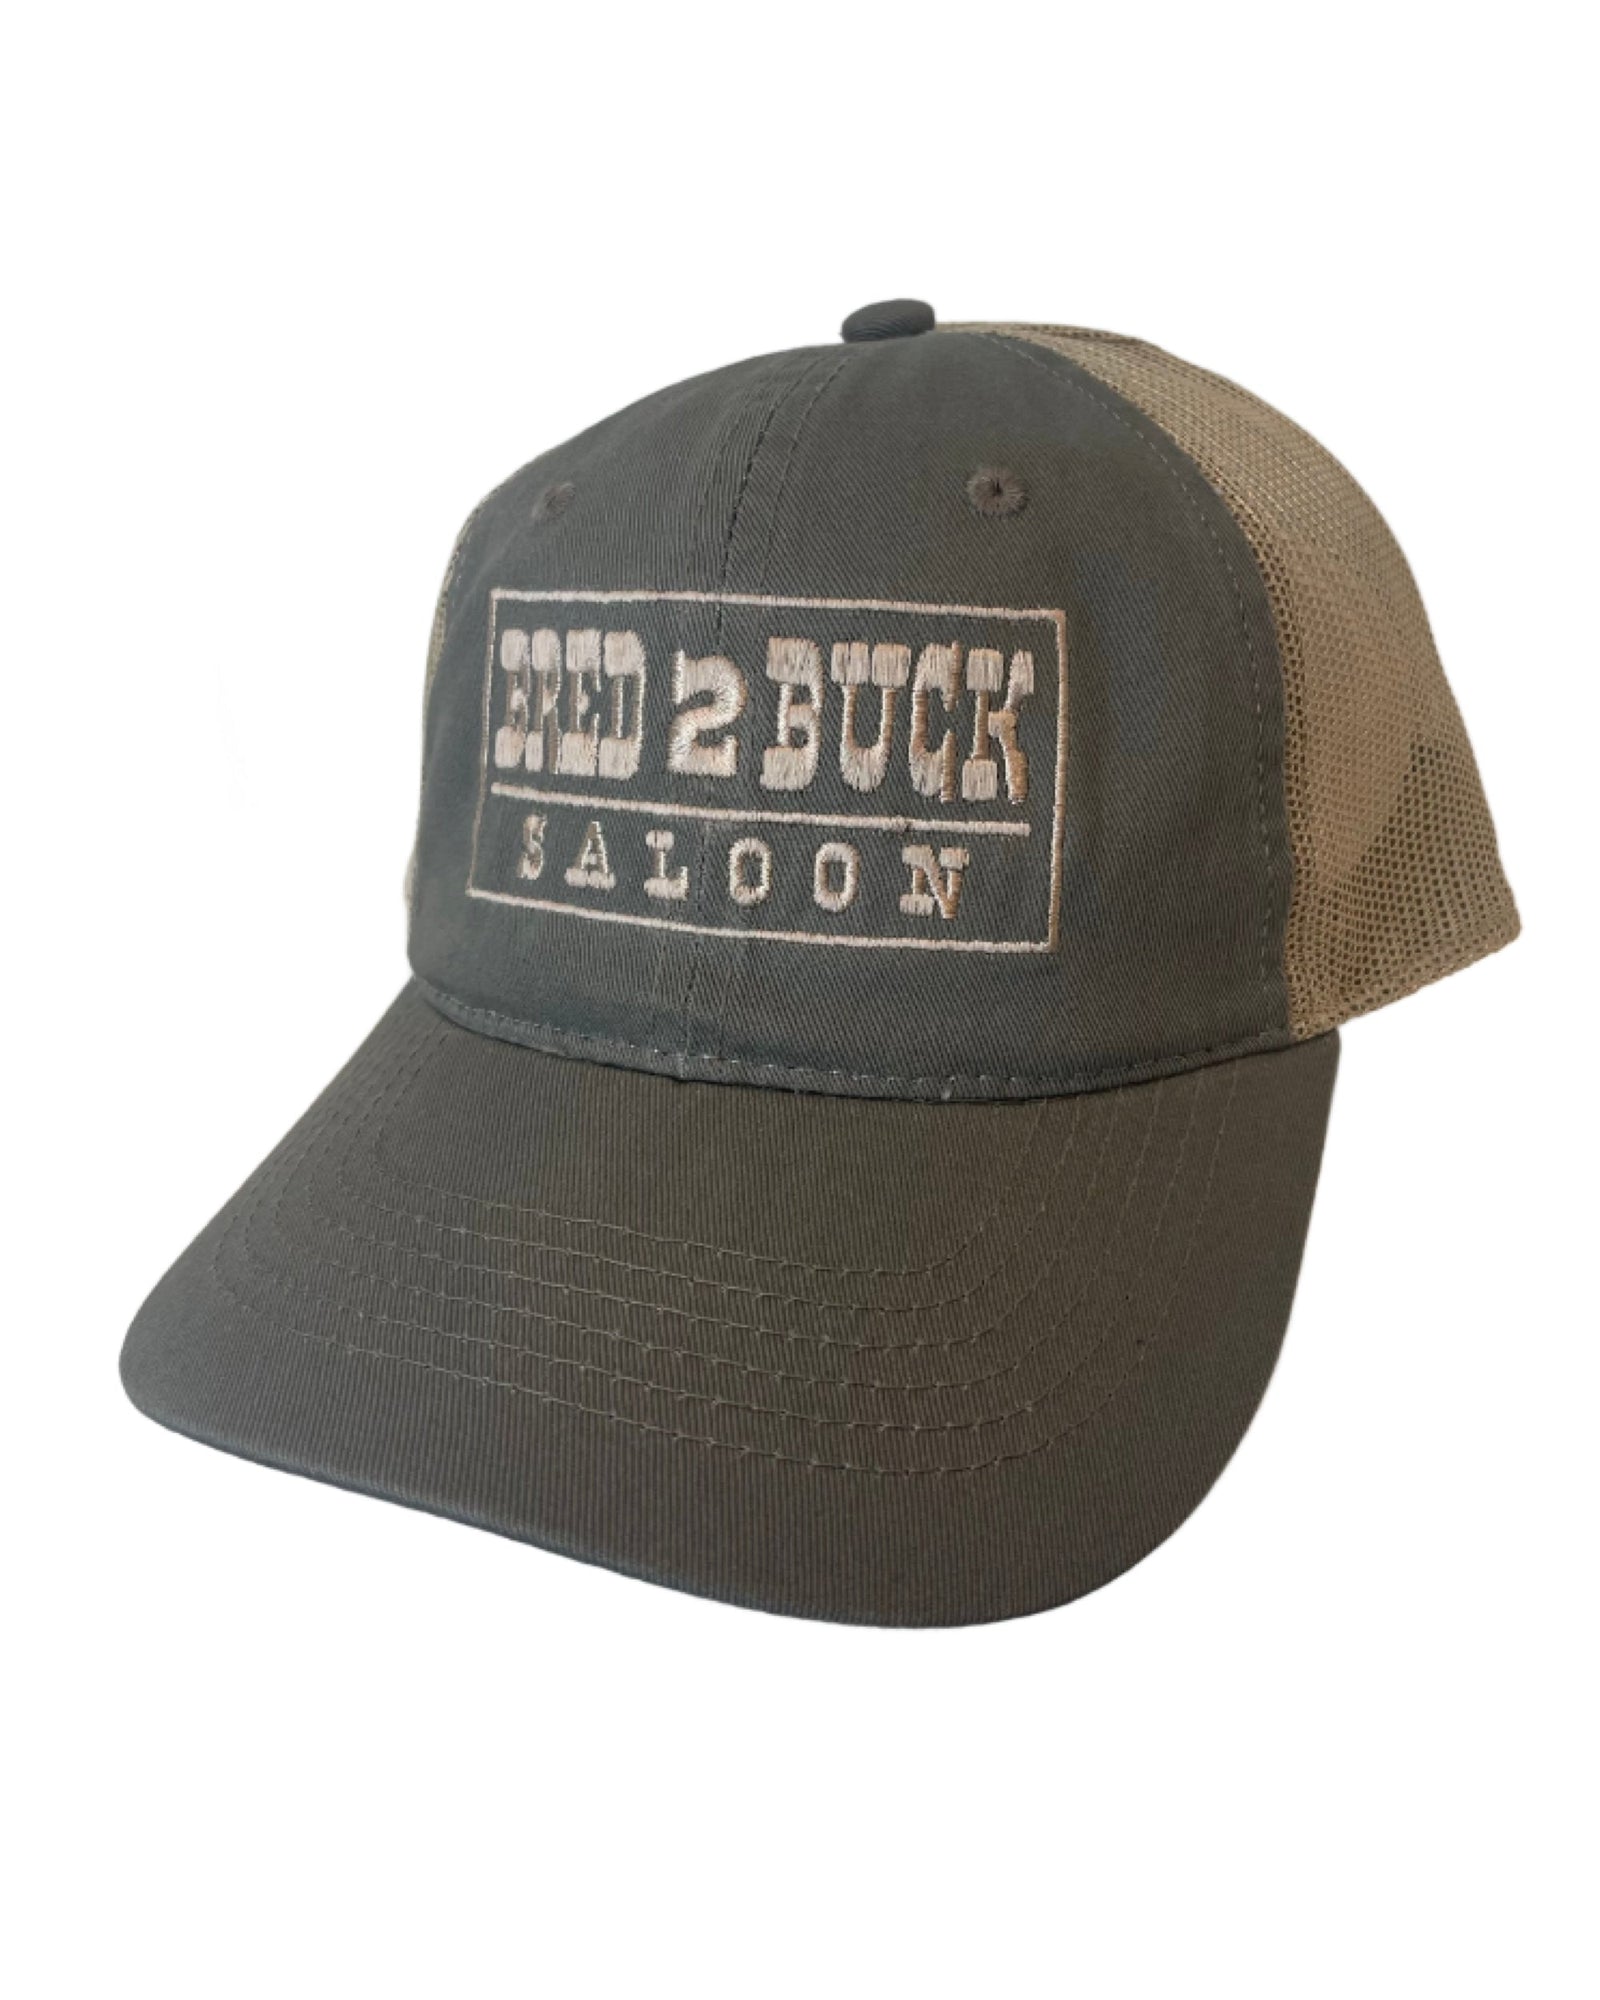 Tulsa King 'Bred to Buck' Hat